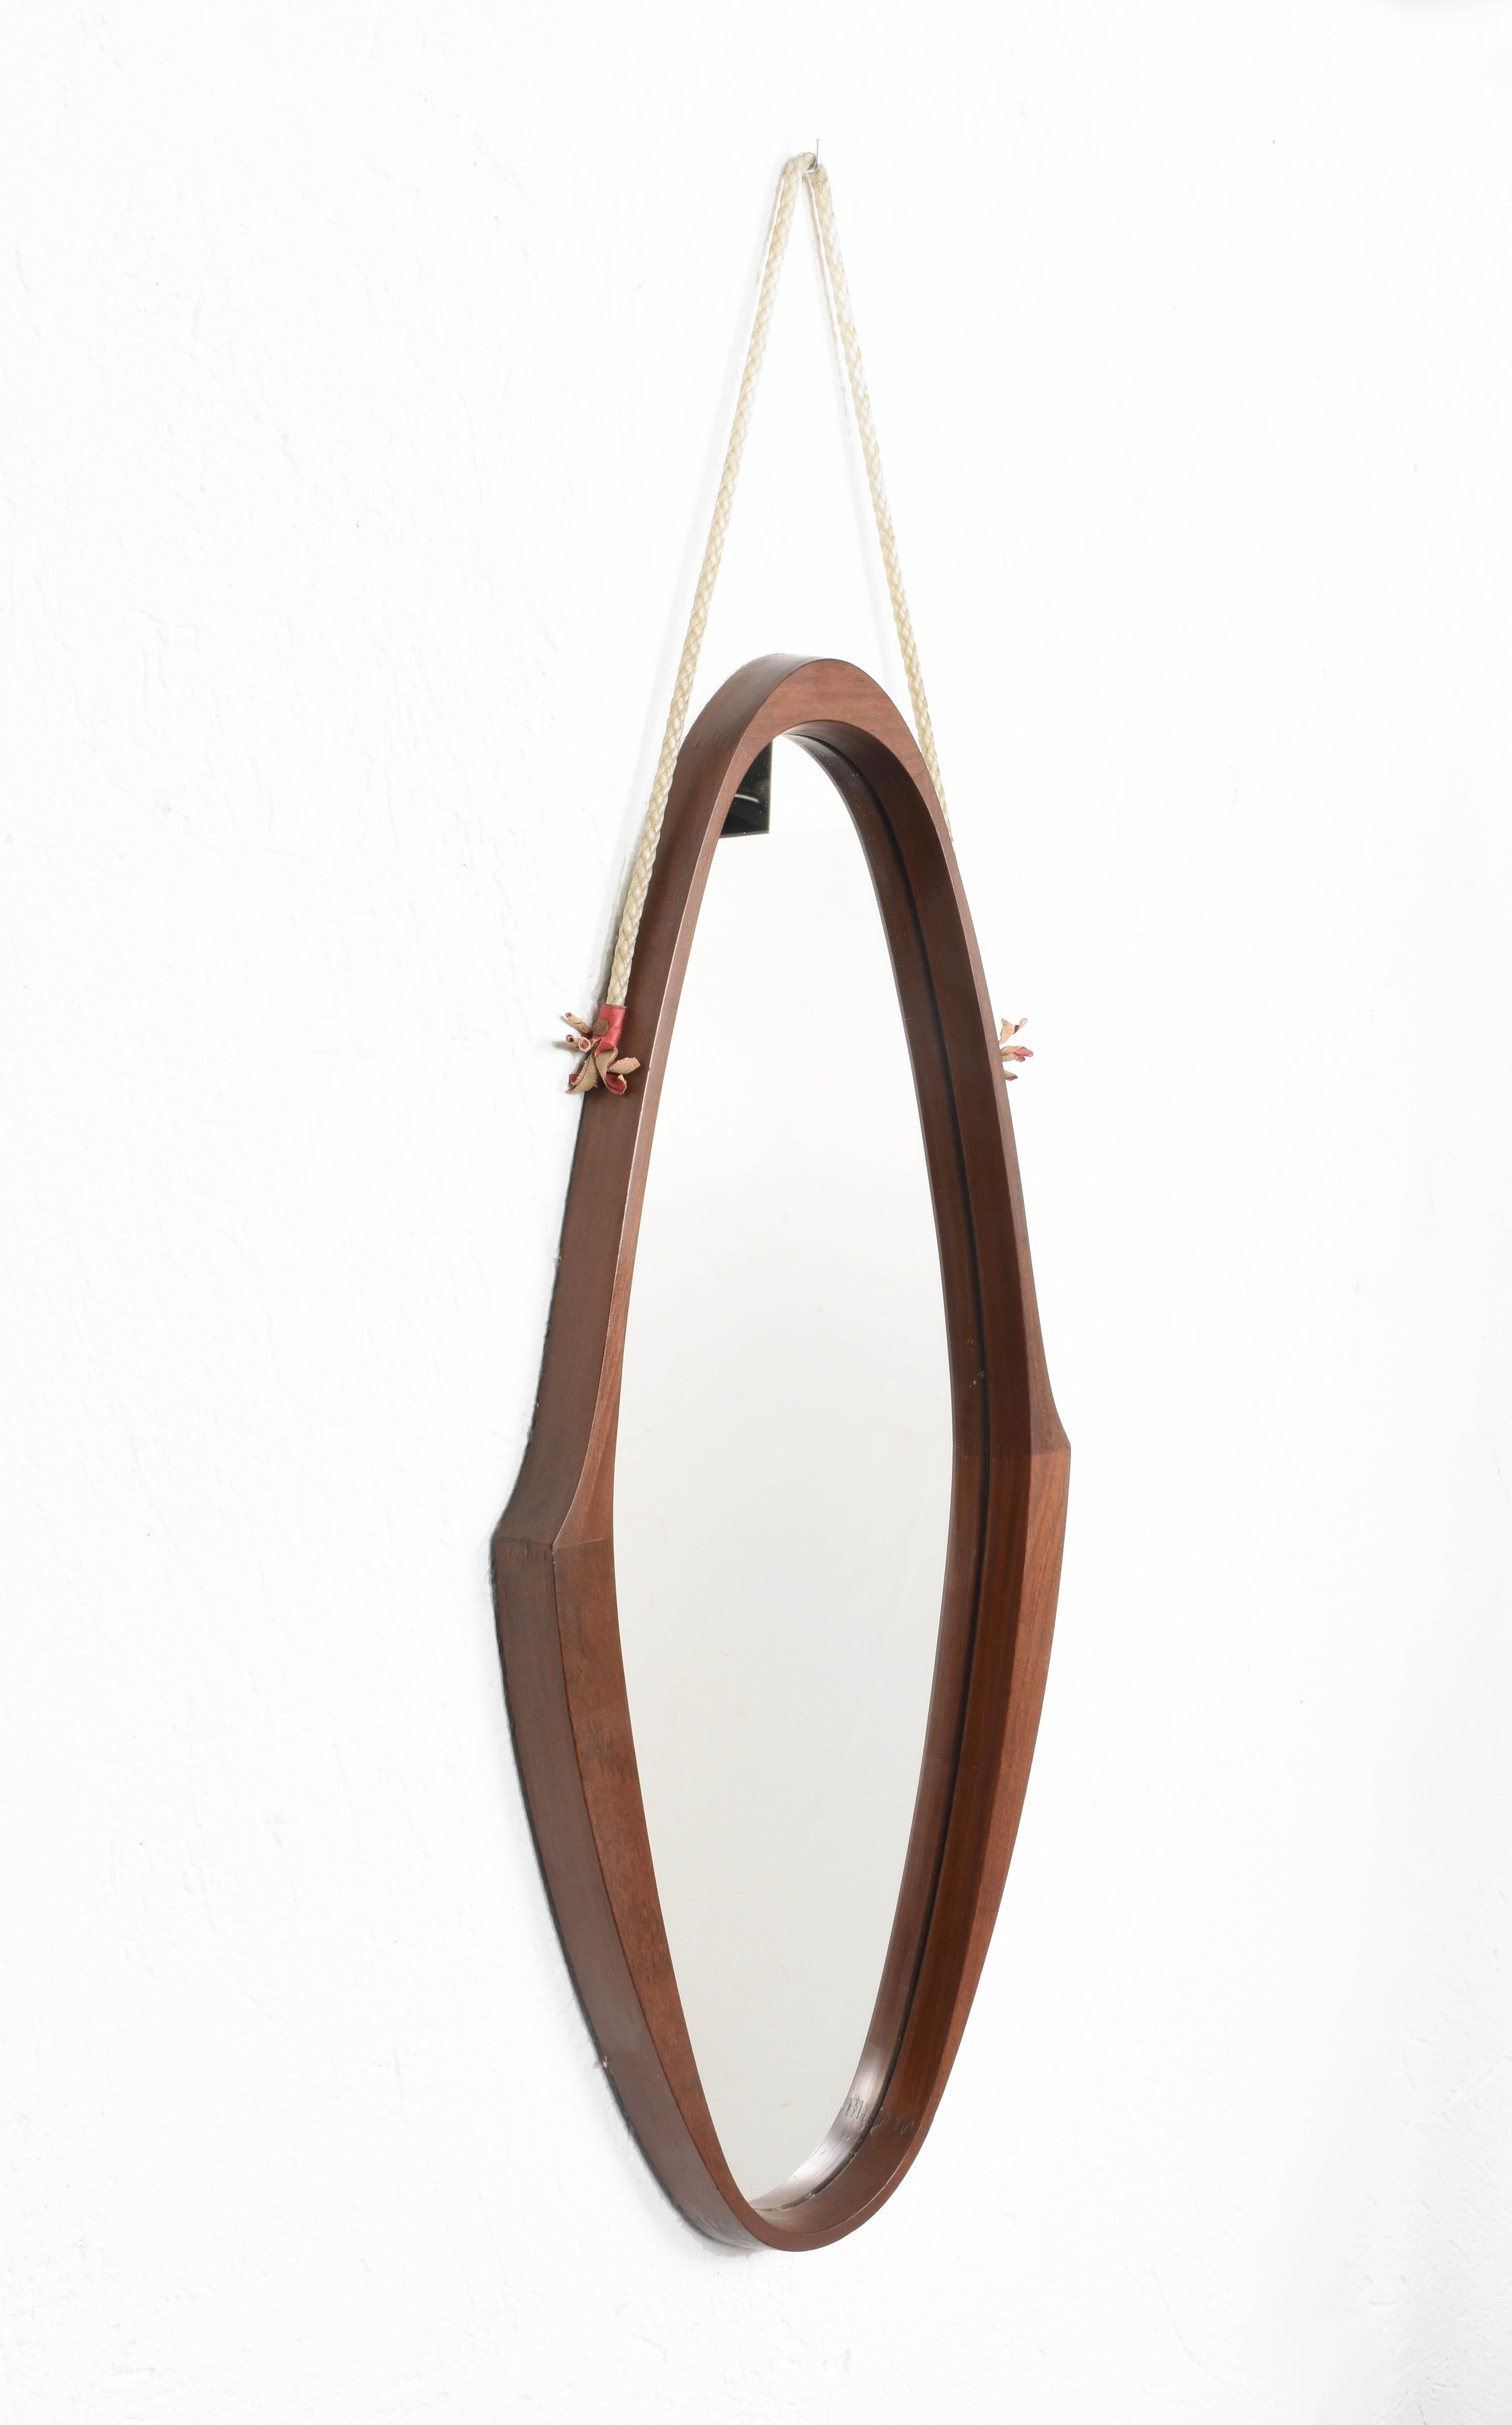 Amazing midcentury teak, nylon rope and leather oval wall framed mirror. This wonderful piece was produced in Italy during the 1960s.

This item has an astonishing teak oval structure with a unique design, the structure seems floating thanks to